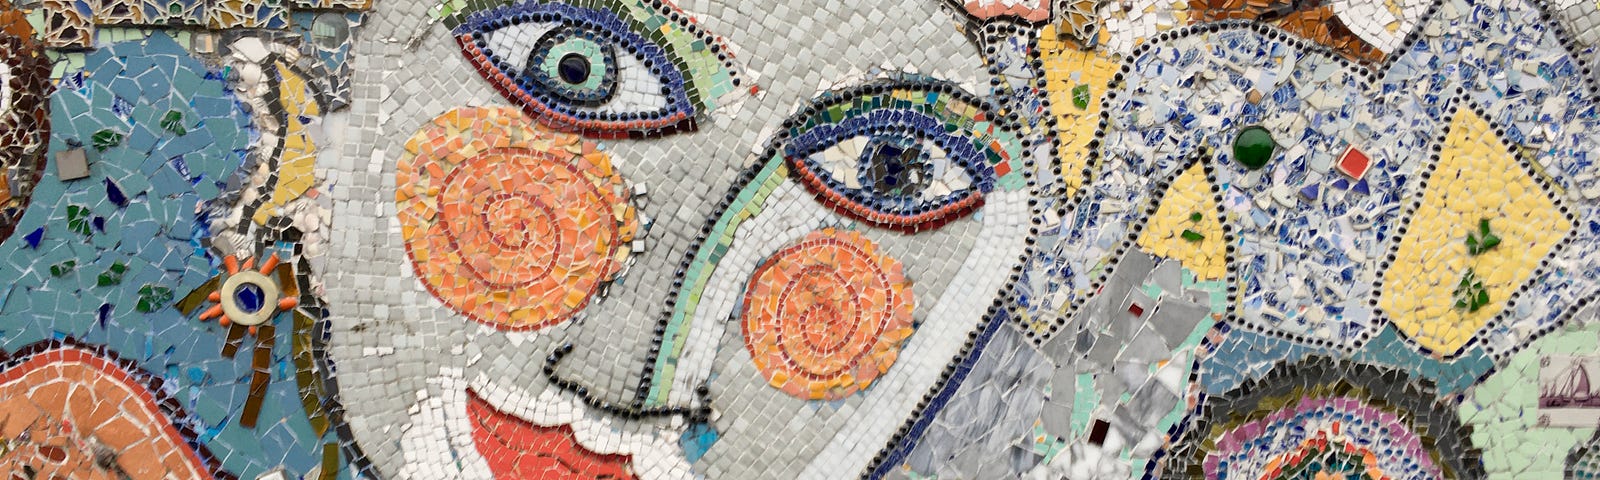 Photo of a mosaic of faces.